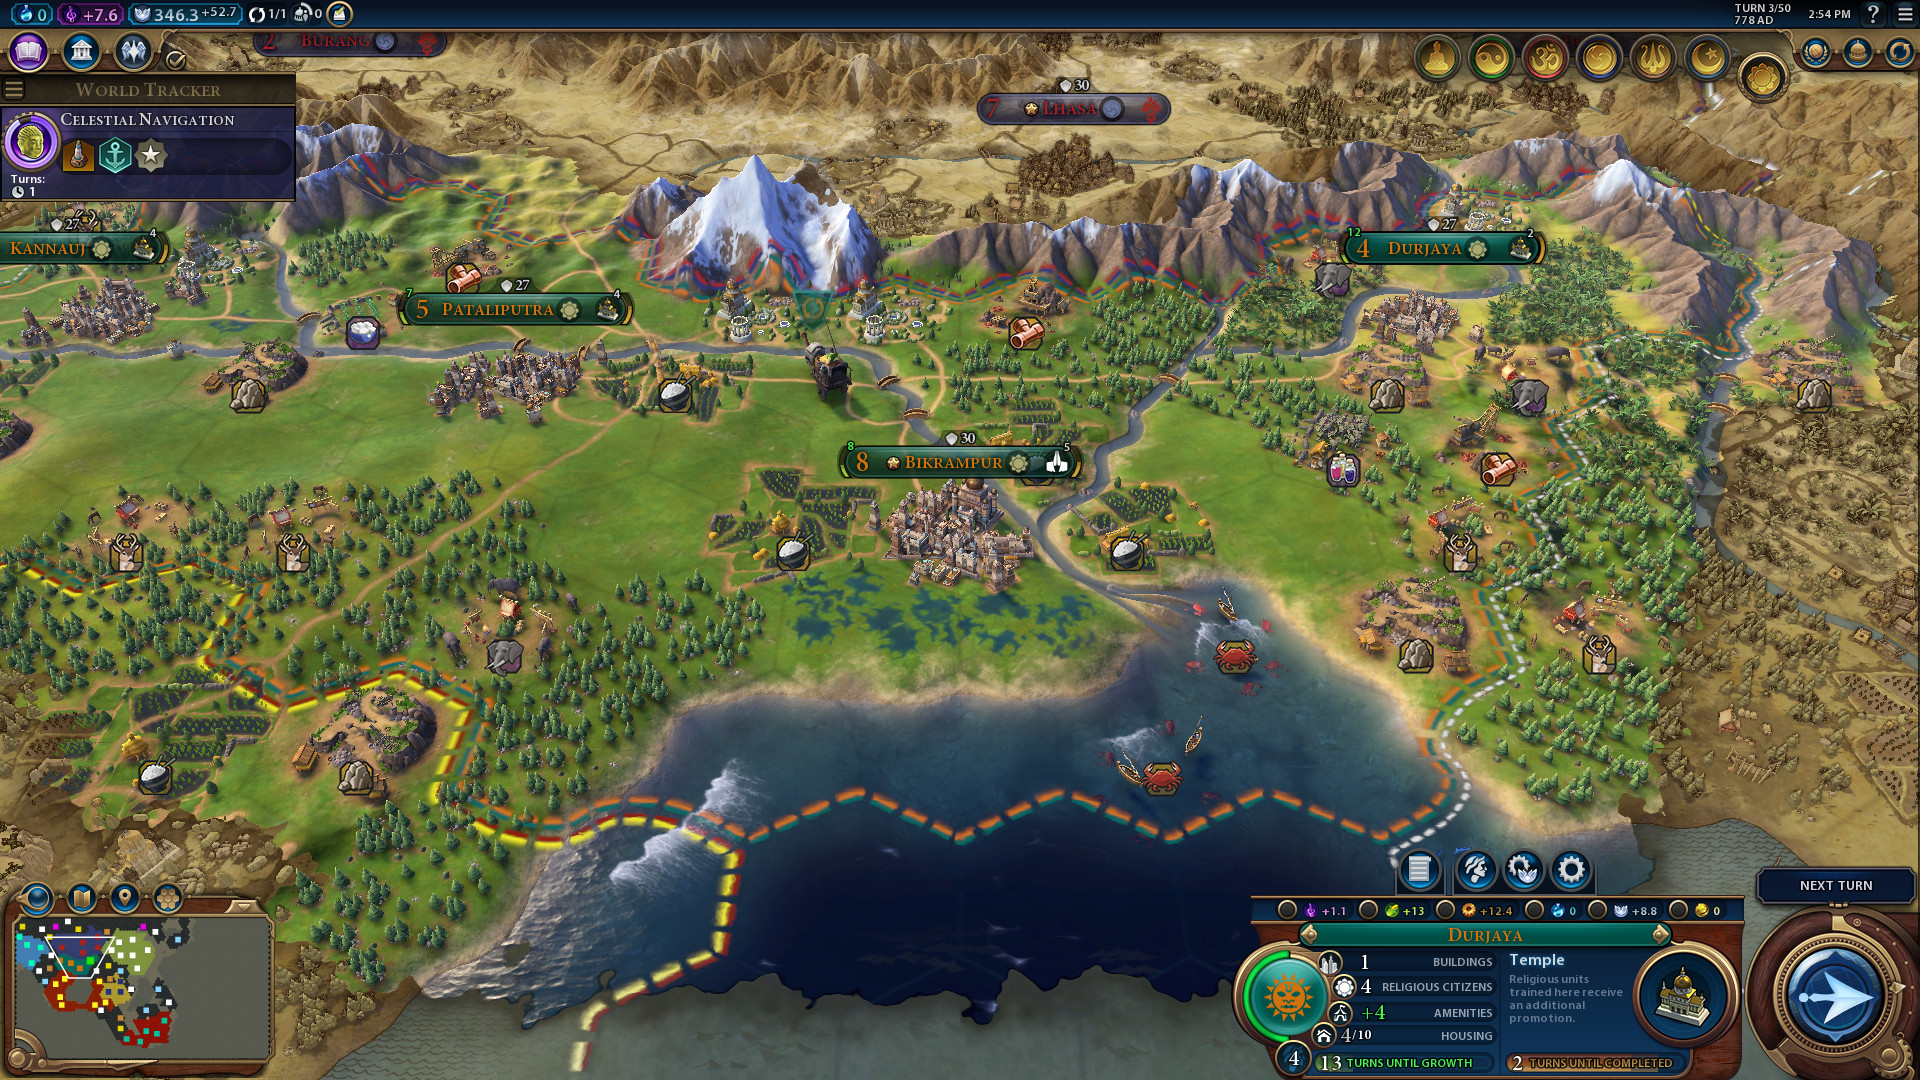 Is Civilization VI Cross-Platform Between Android And IOS?